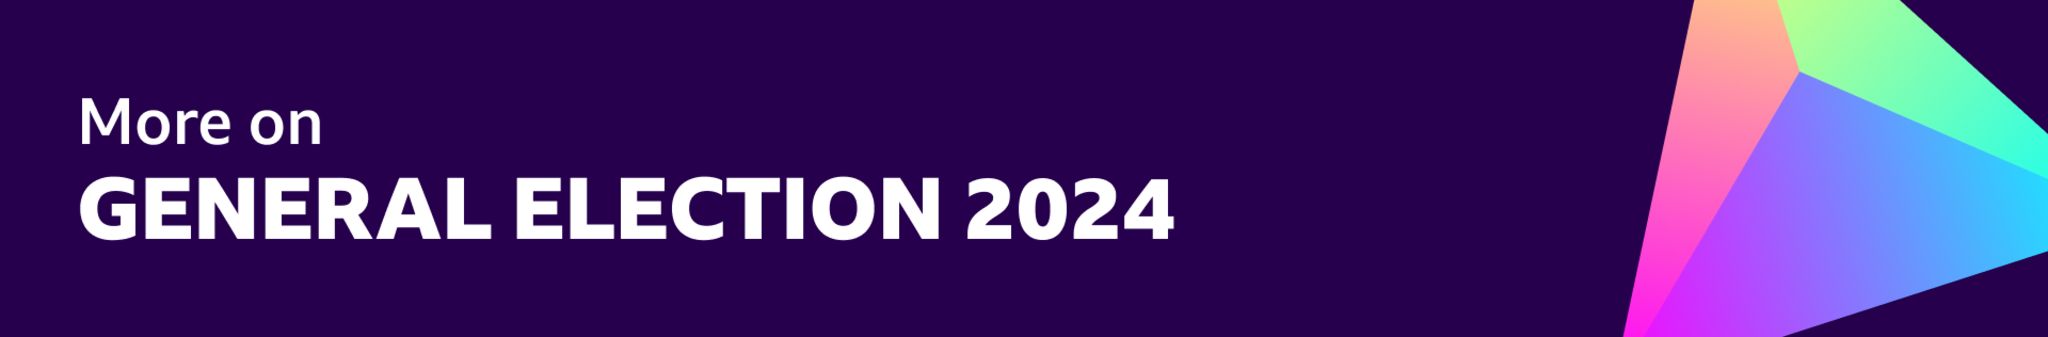 Banner reading "More on general election 2024"